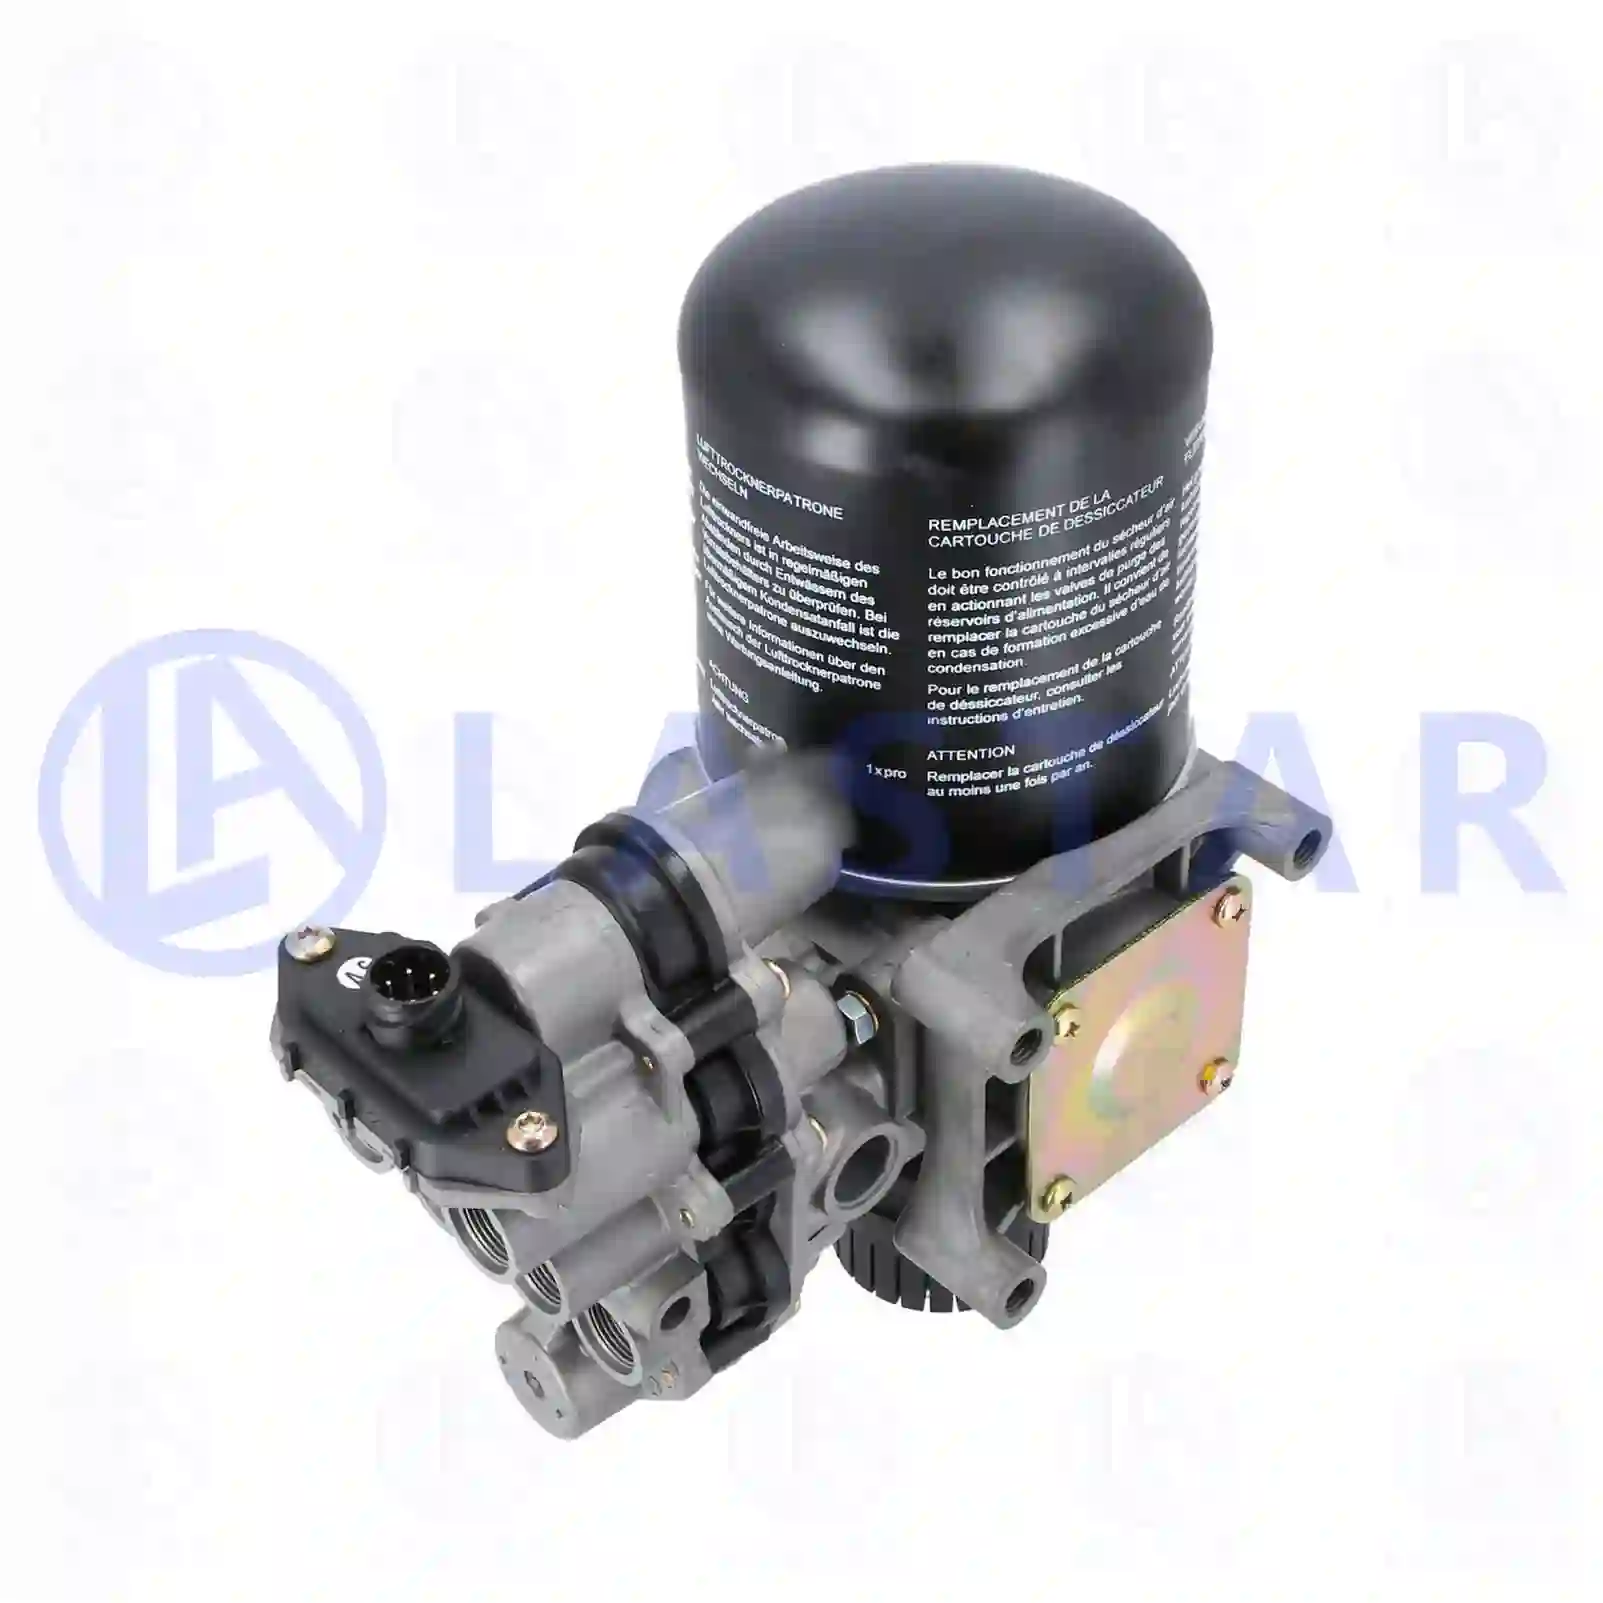 Air dryer, complete with valve, 77716287, 1681570, 1681570A, 1681570R ||  77716287 Lastar Spare Part | Truck Spare Parts, Auotomotive Spare Parts Air dryer, complete with valve, 77716287, 1681570, 1681570A, 1681570R ||  77716287 Lastar Spare Part | Truck Spare Parts, Auotomotive Spare Parts